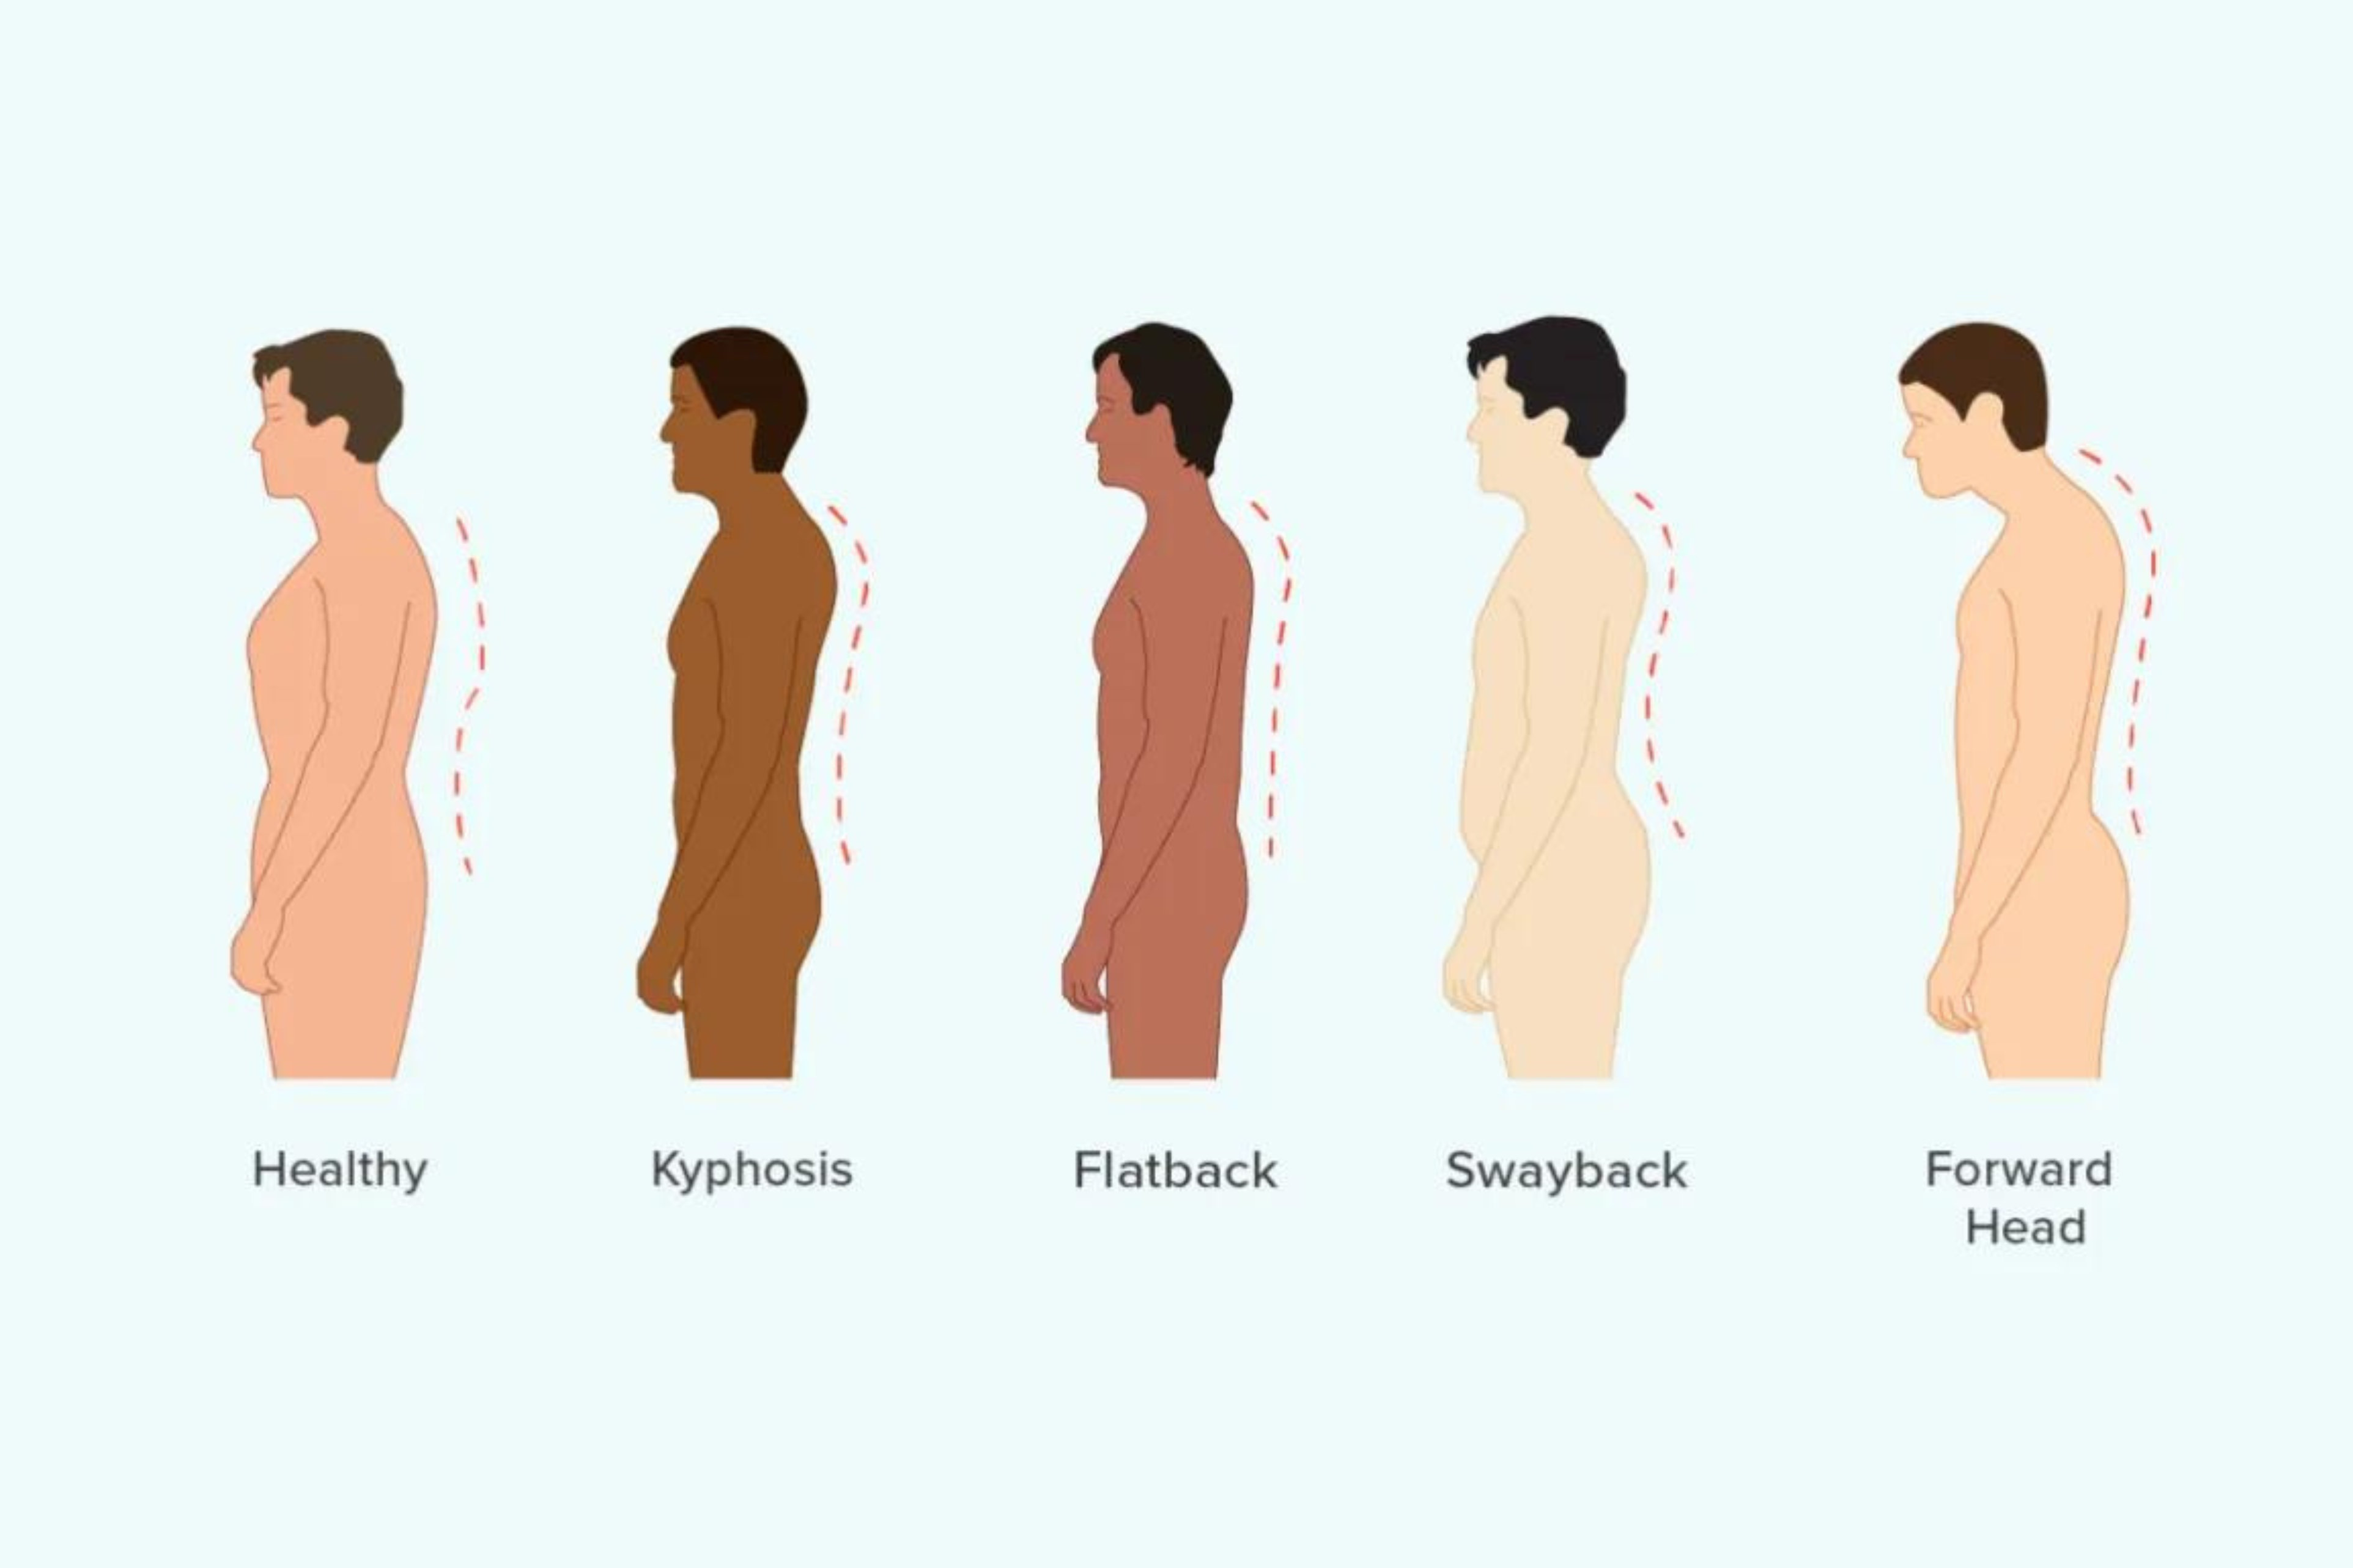 Swayback Posture Risks and Treatment